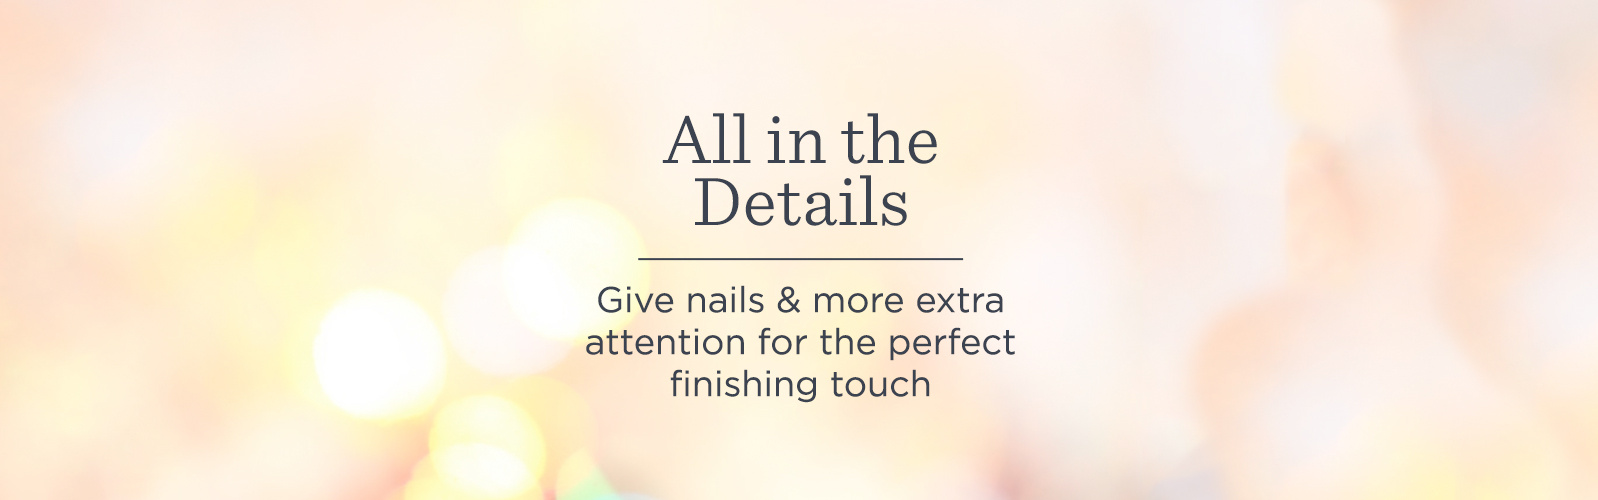 All in the Details. Give nails & more extra attention for the perfect finishing touch